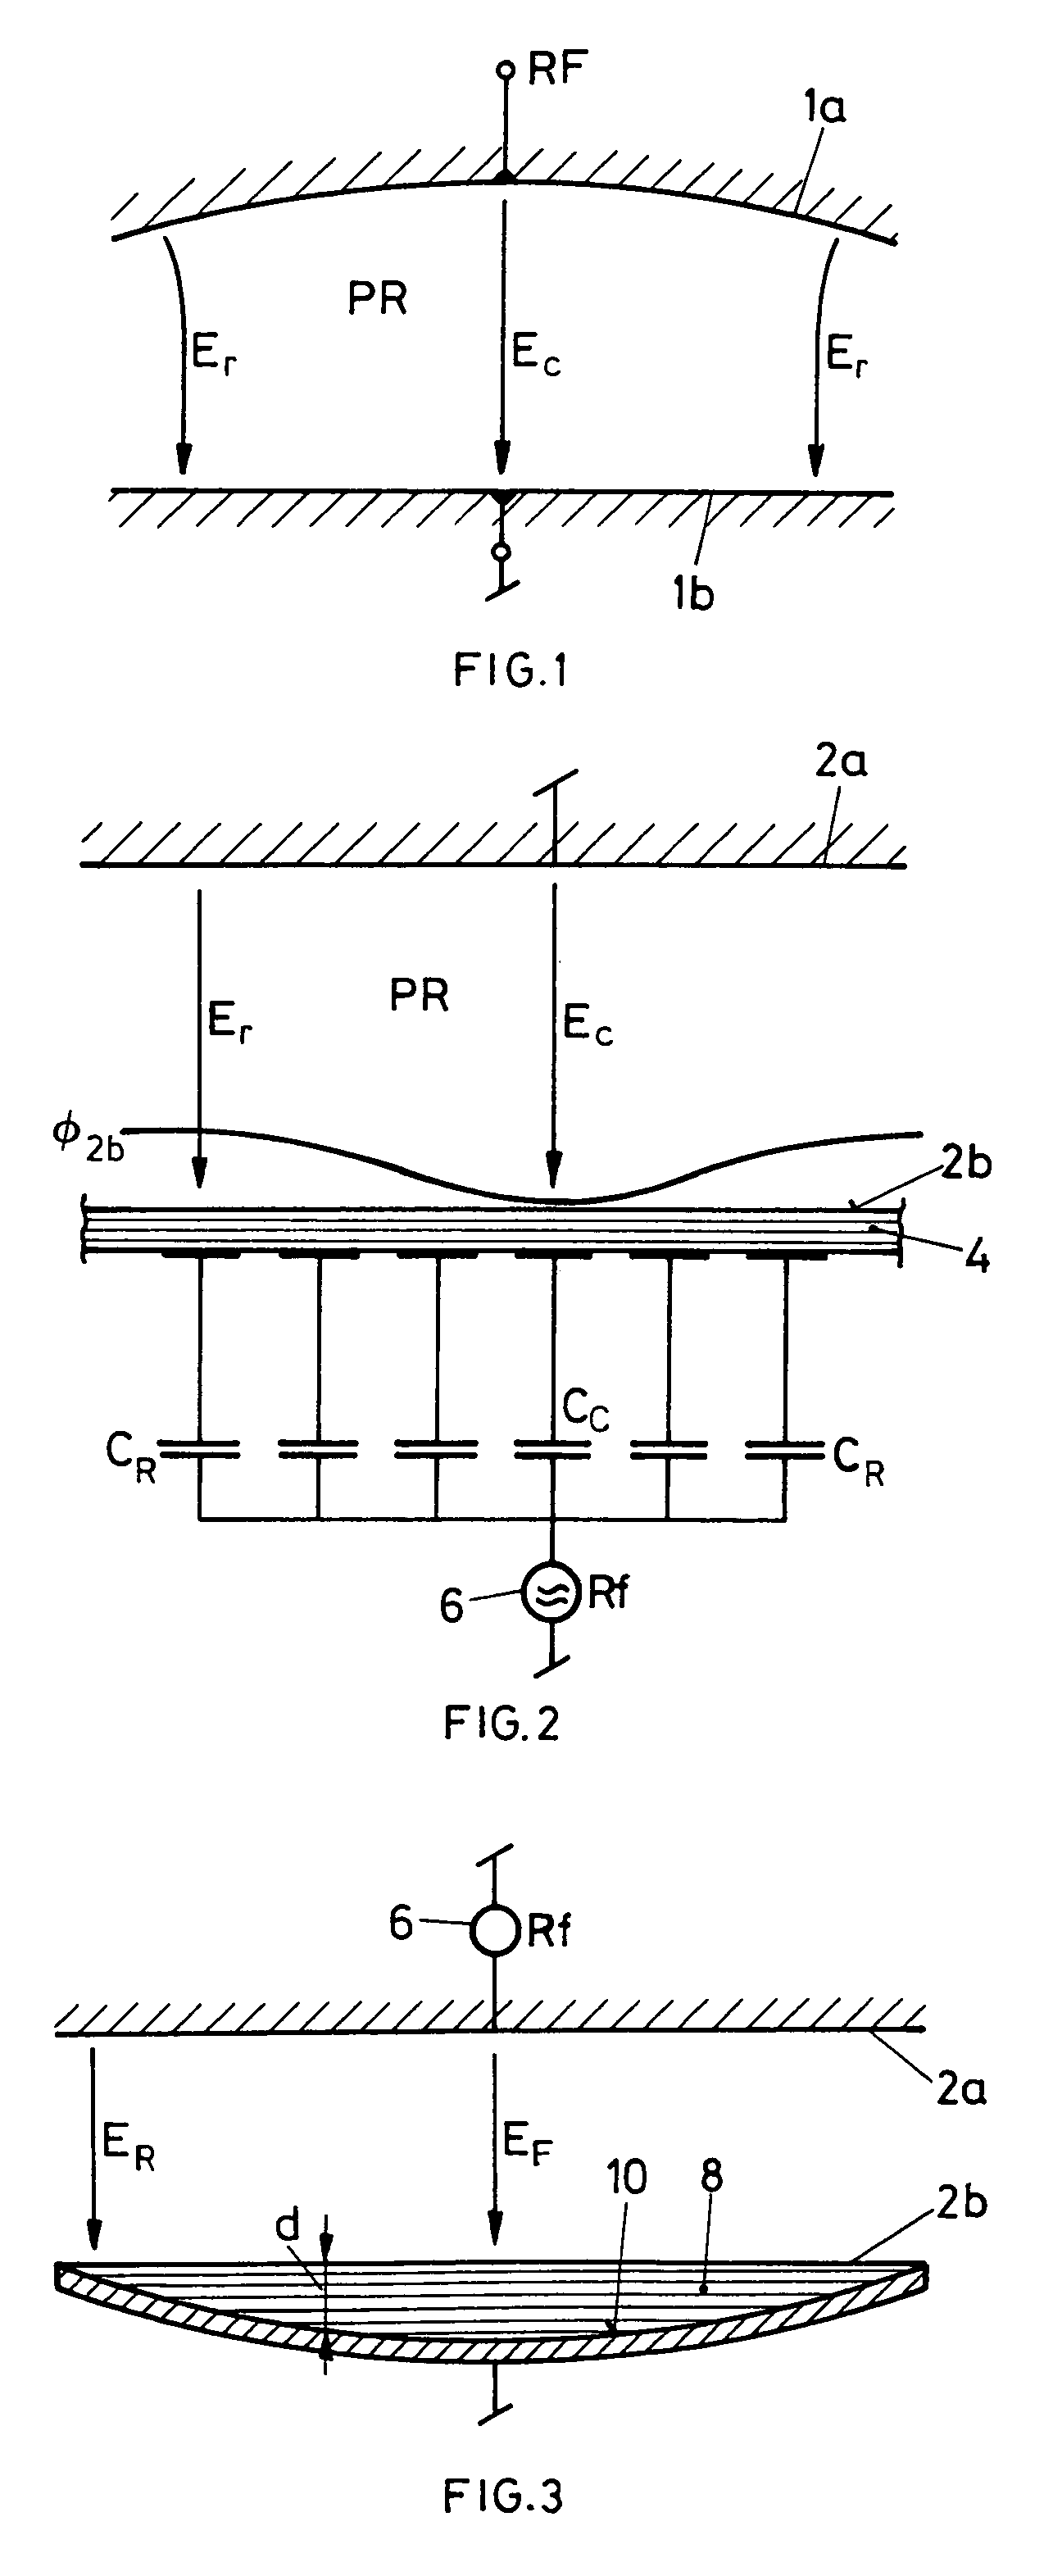 Method for manufacturing a plate-shaped workpiece